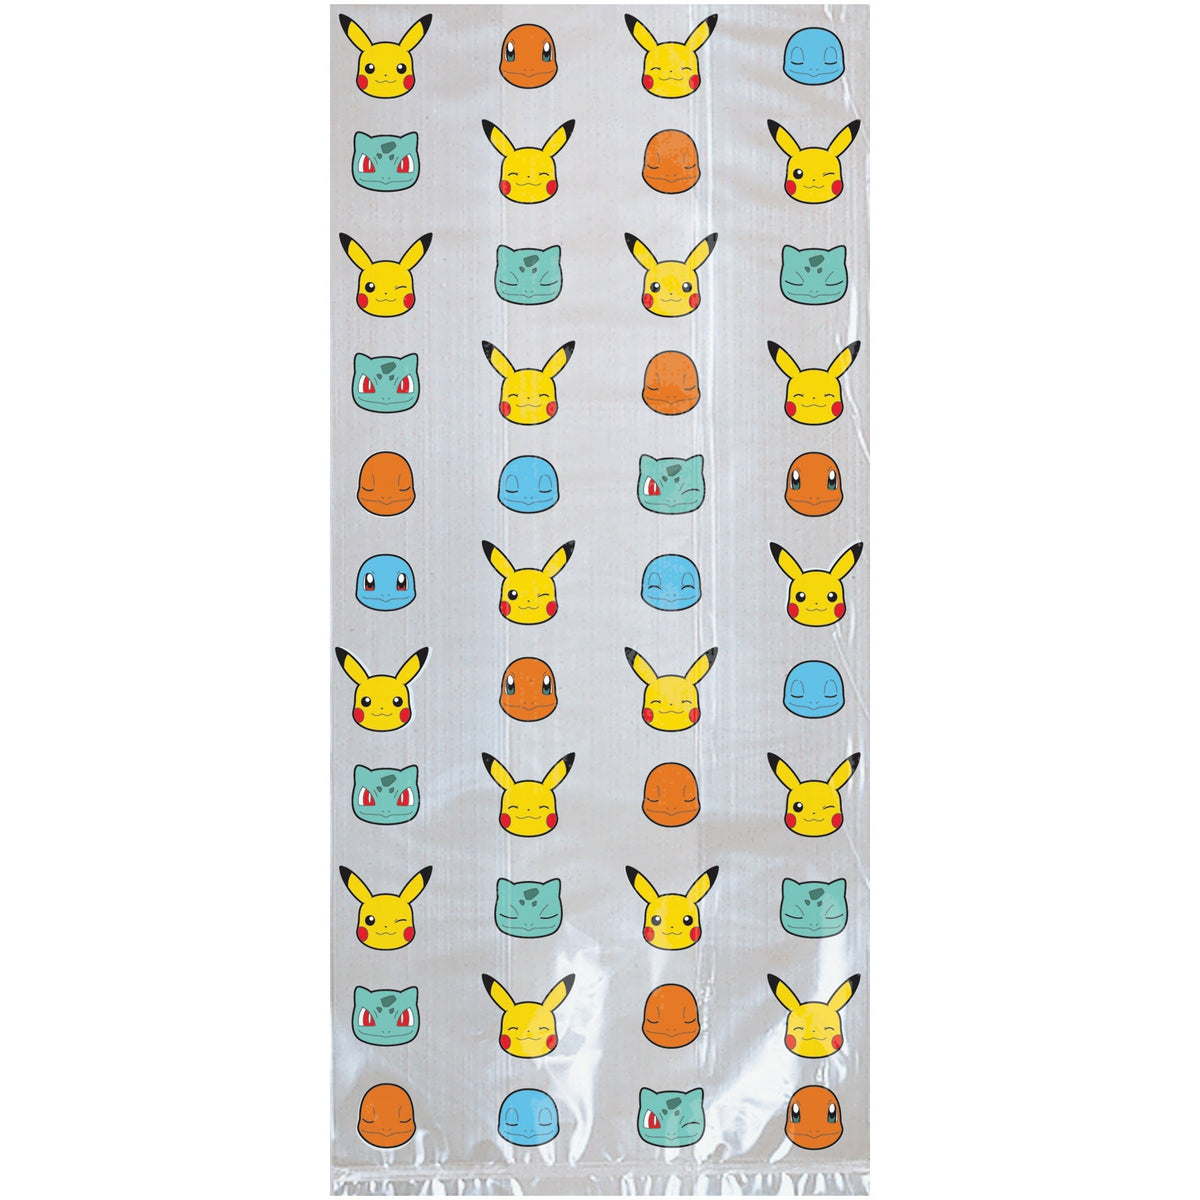 AMSCAN CA Kids Birthday Pokémon Birthday Party Favour Bags, 9.5 x 4 x 1 Inches, 16 Count